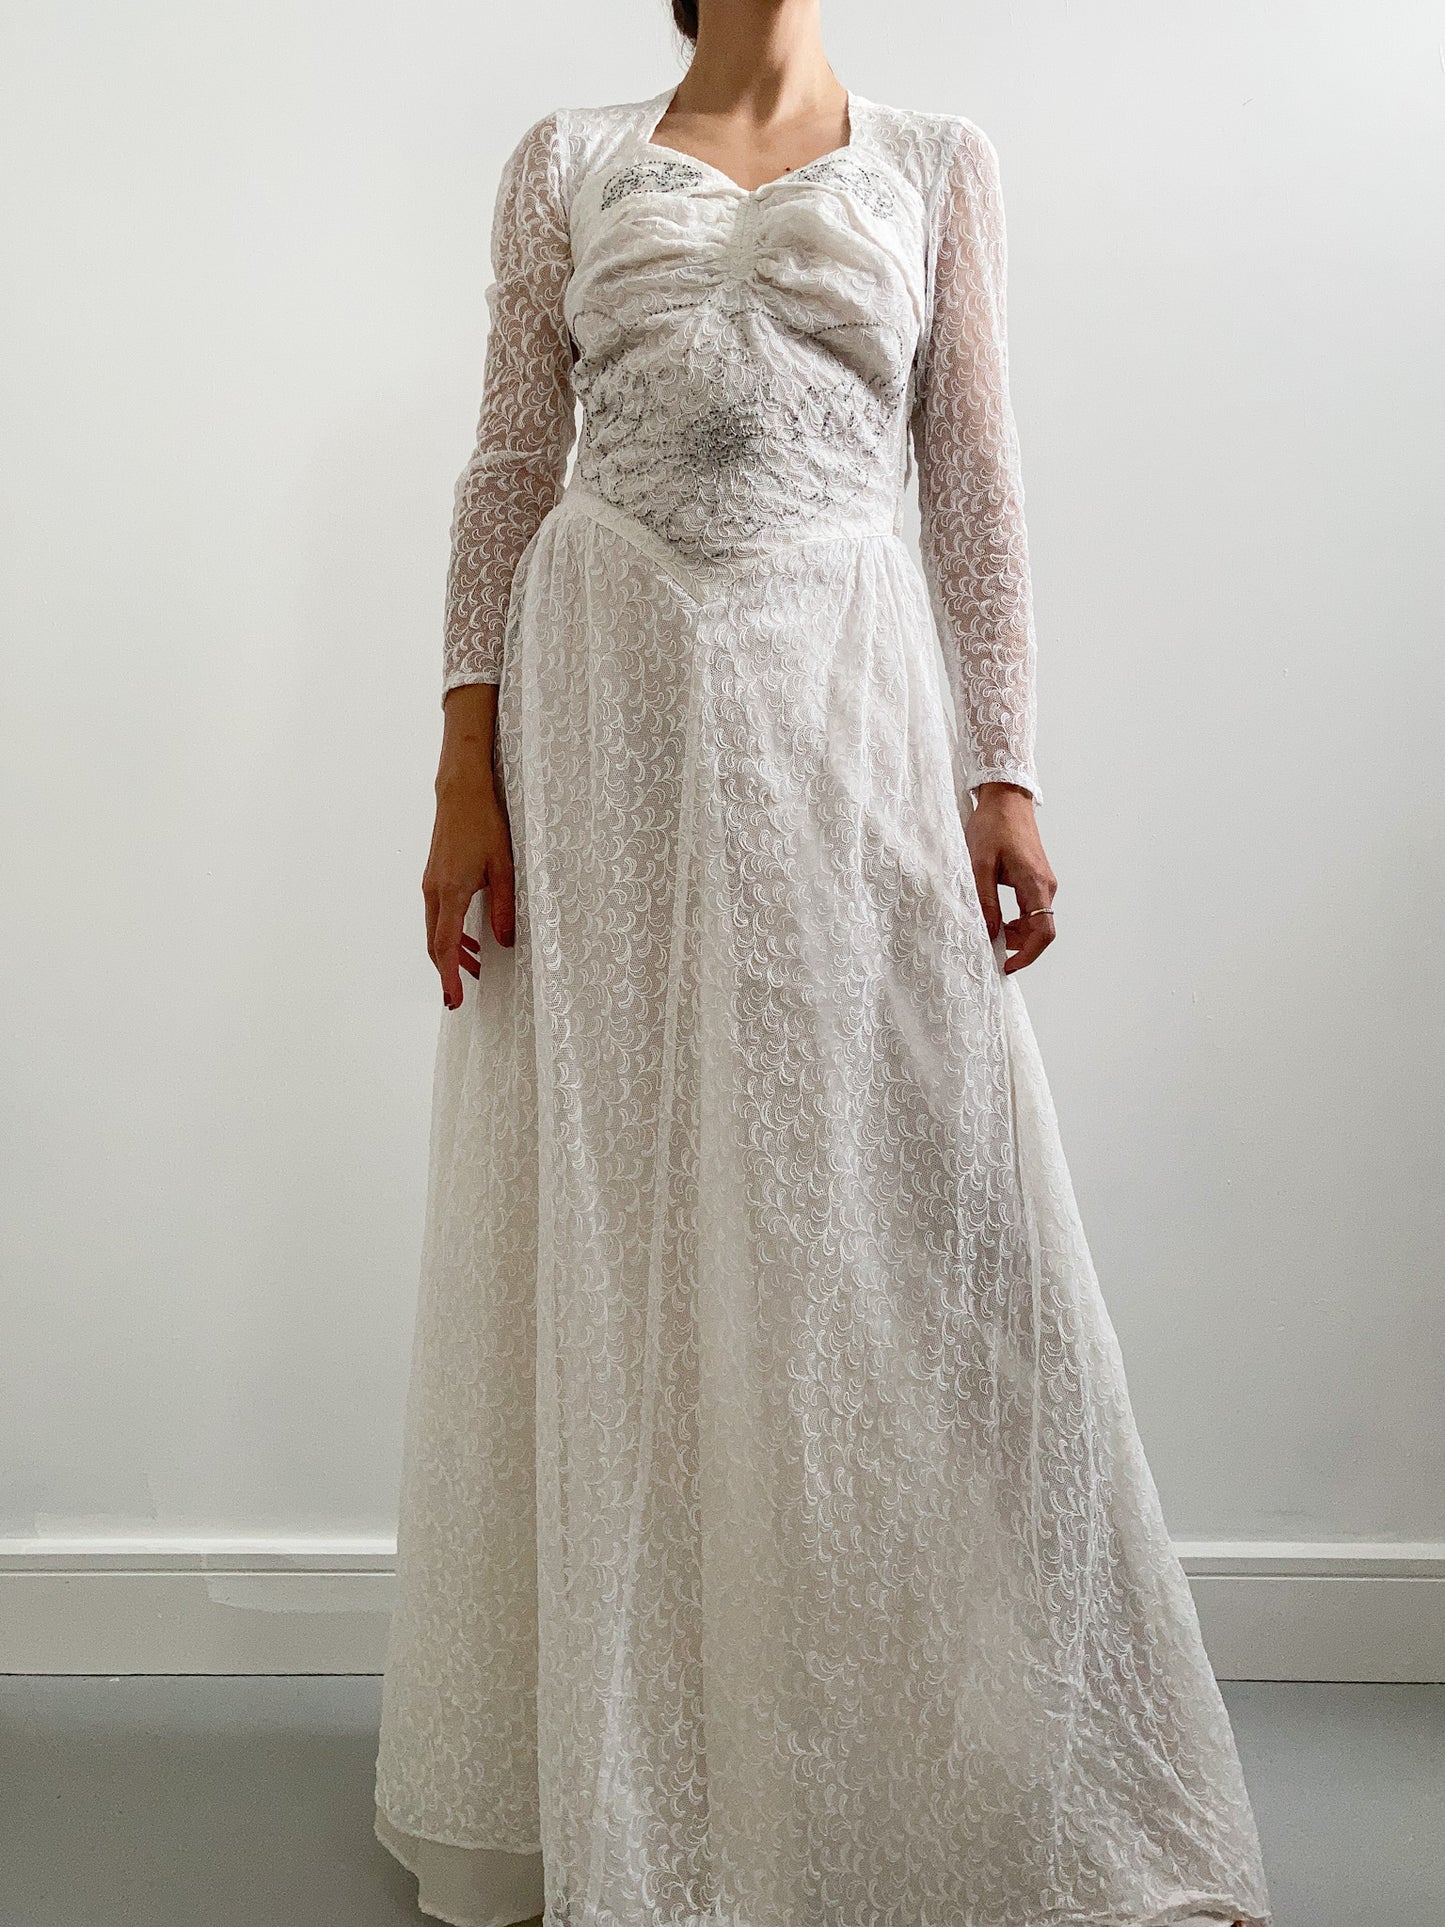 1940s Floral Lace Beaded Wedding Dress